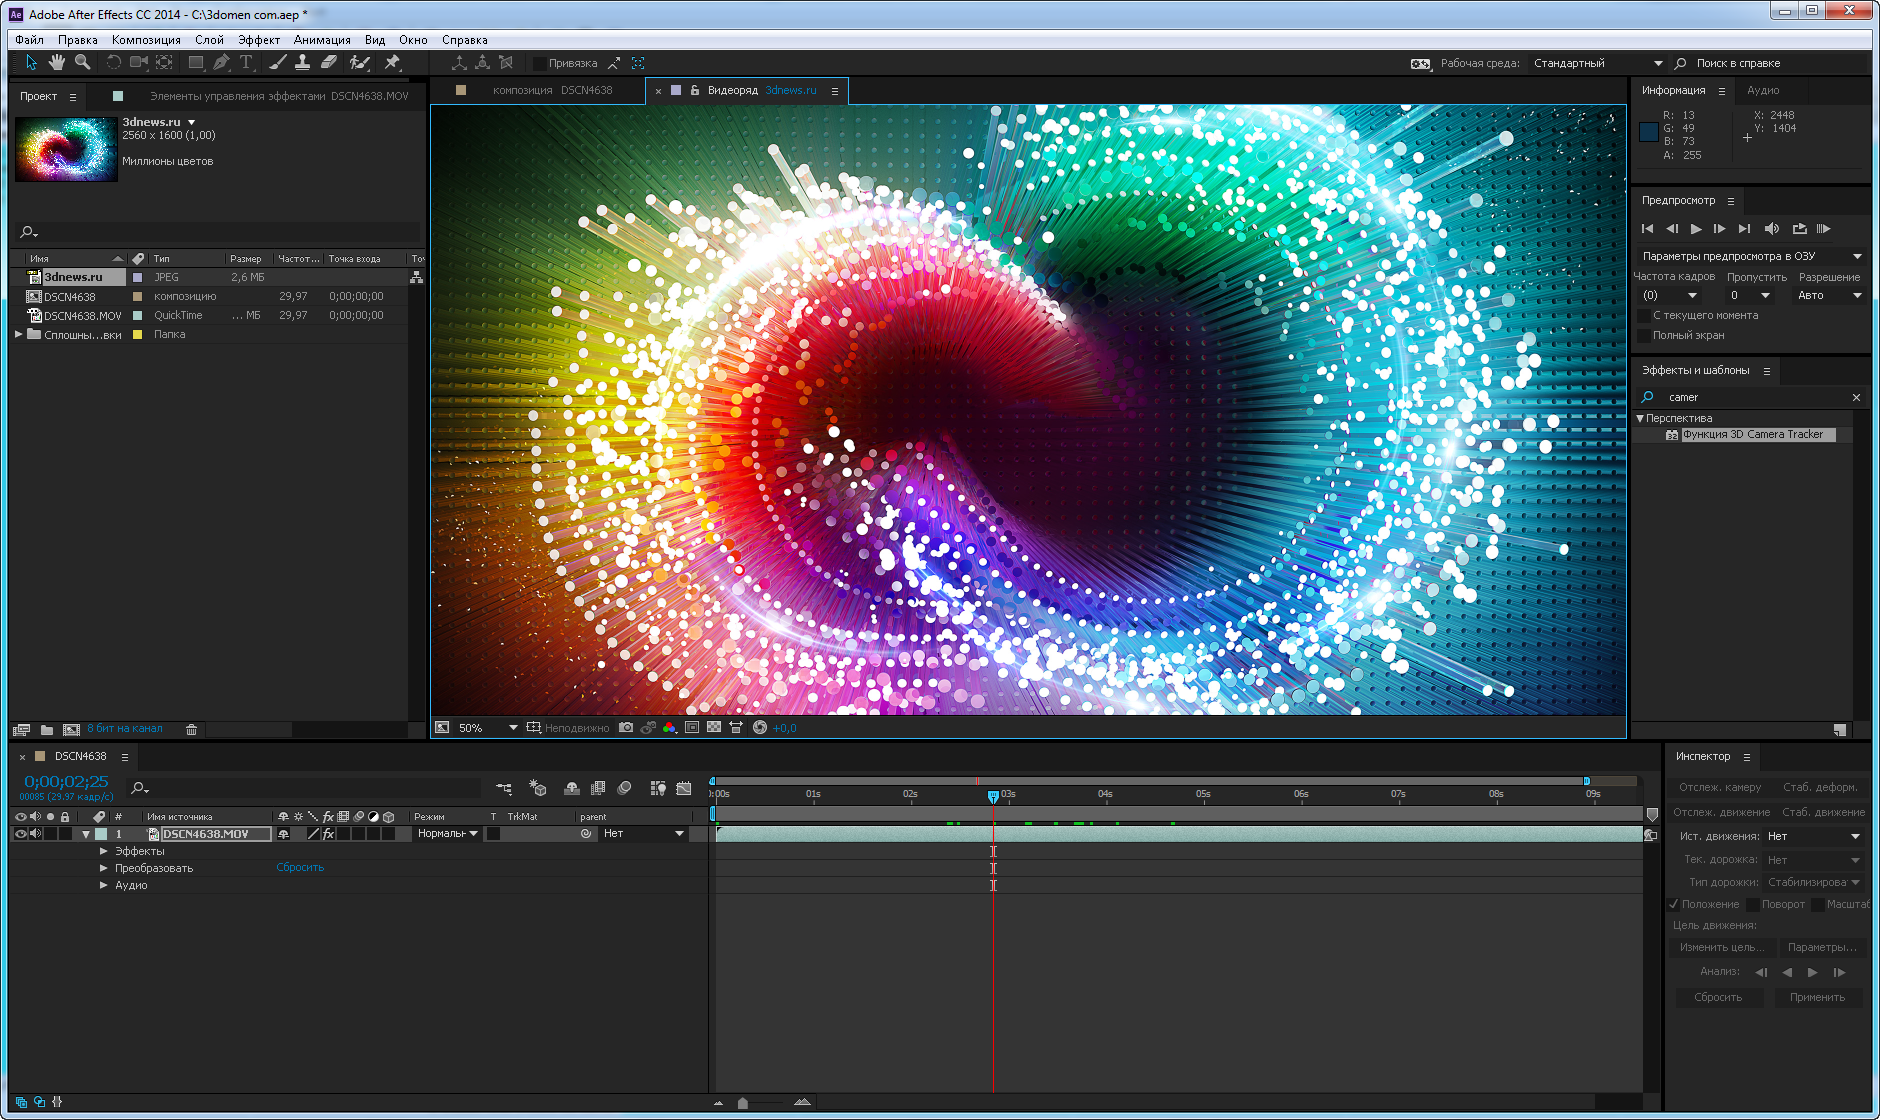 Effects editor. After Effects. After Effects эффекты. Adobe after Effects. Эффекты Афтер эффектс.